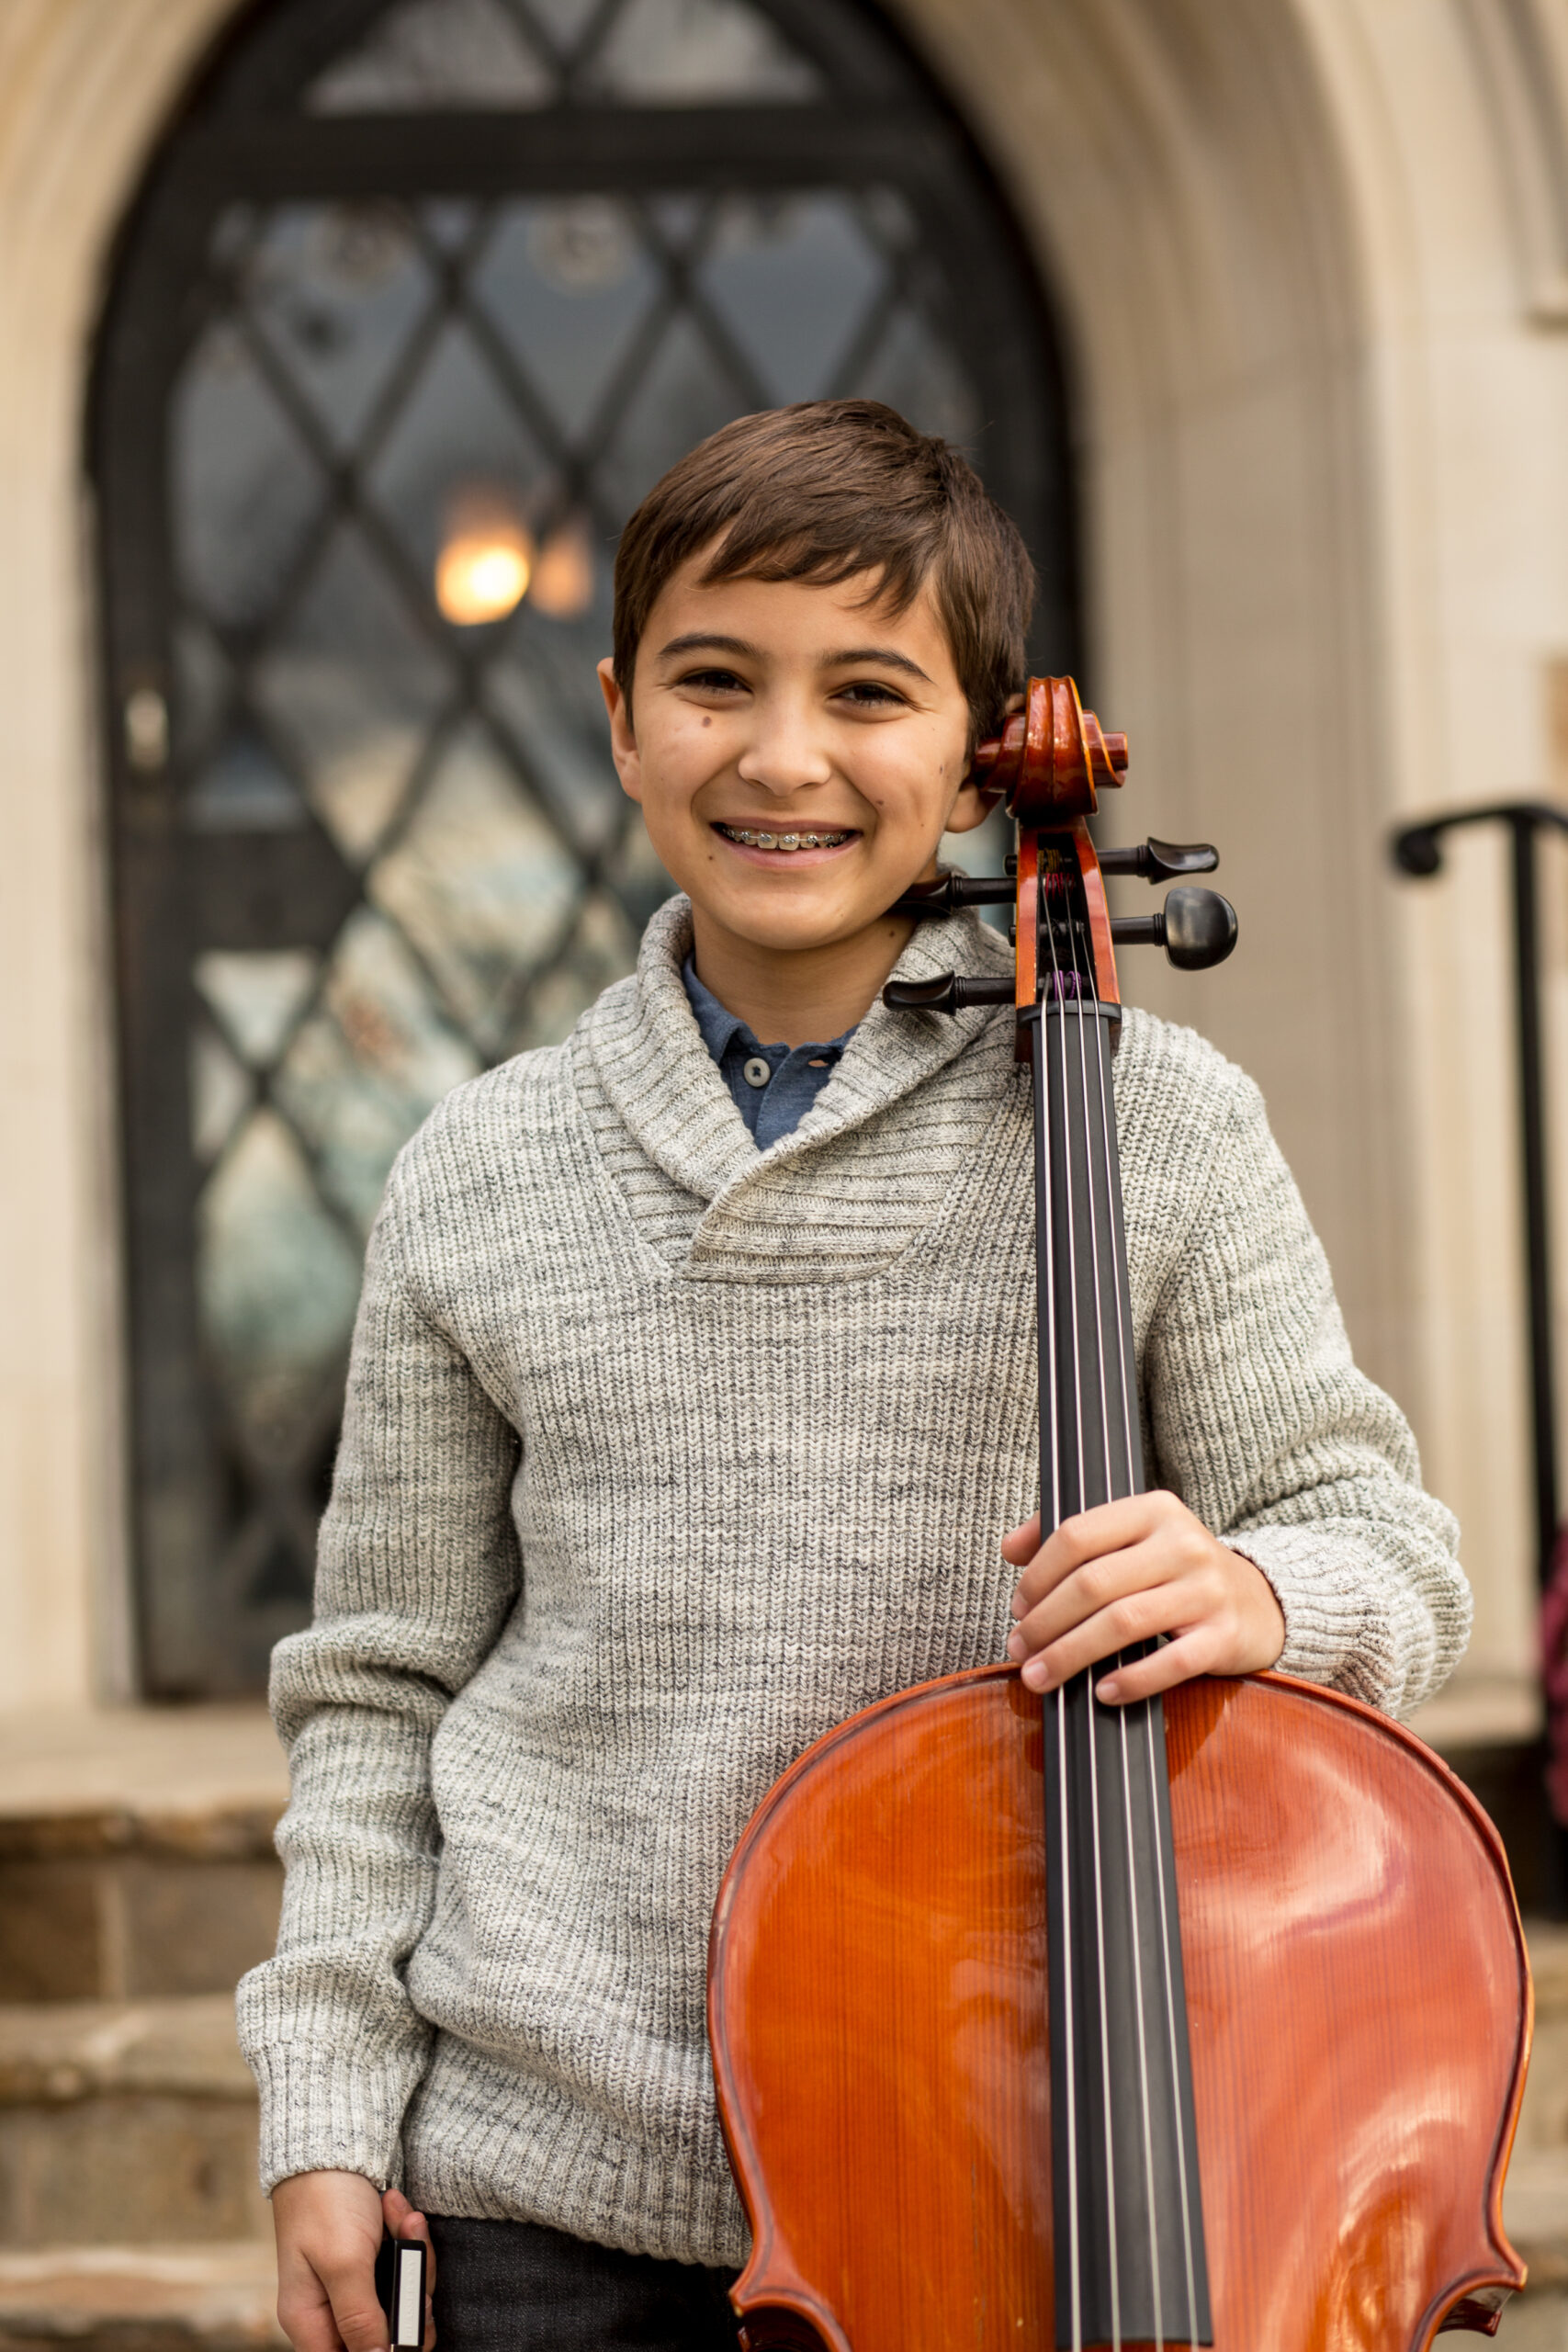 How to Buy Your Child's First Cello